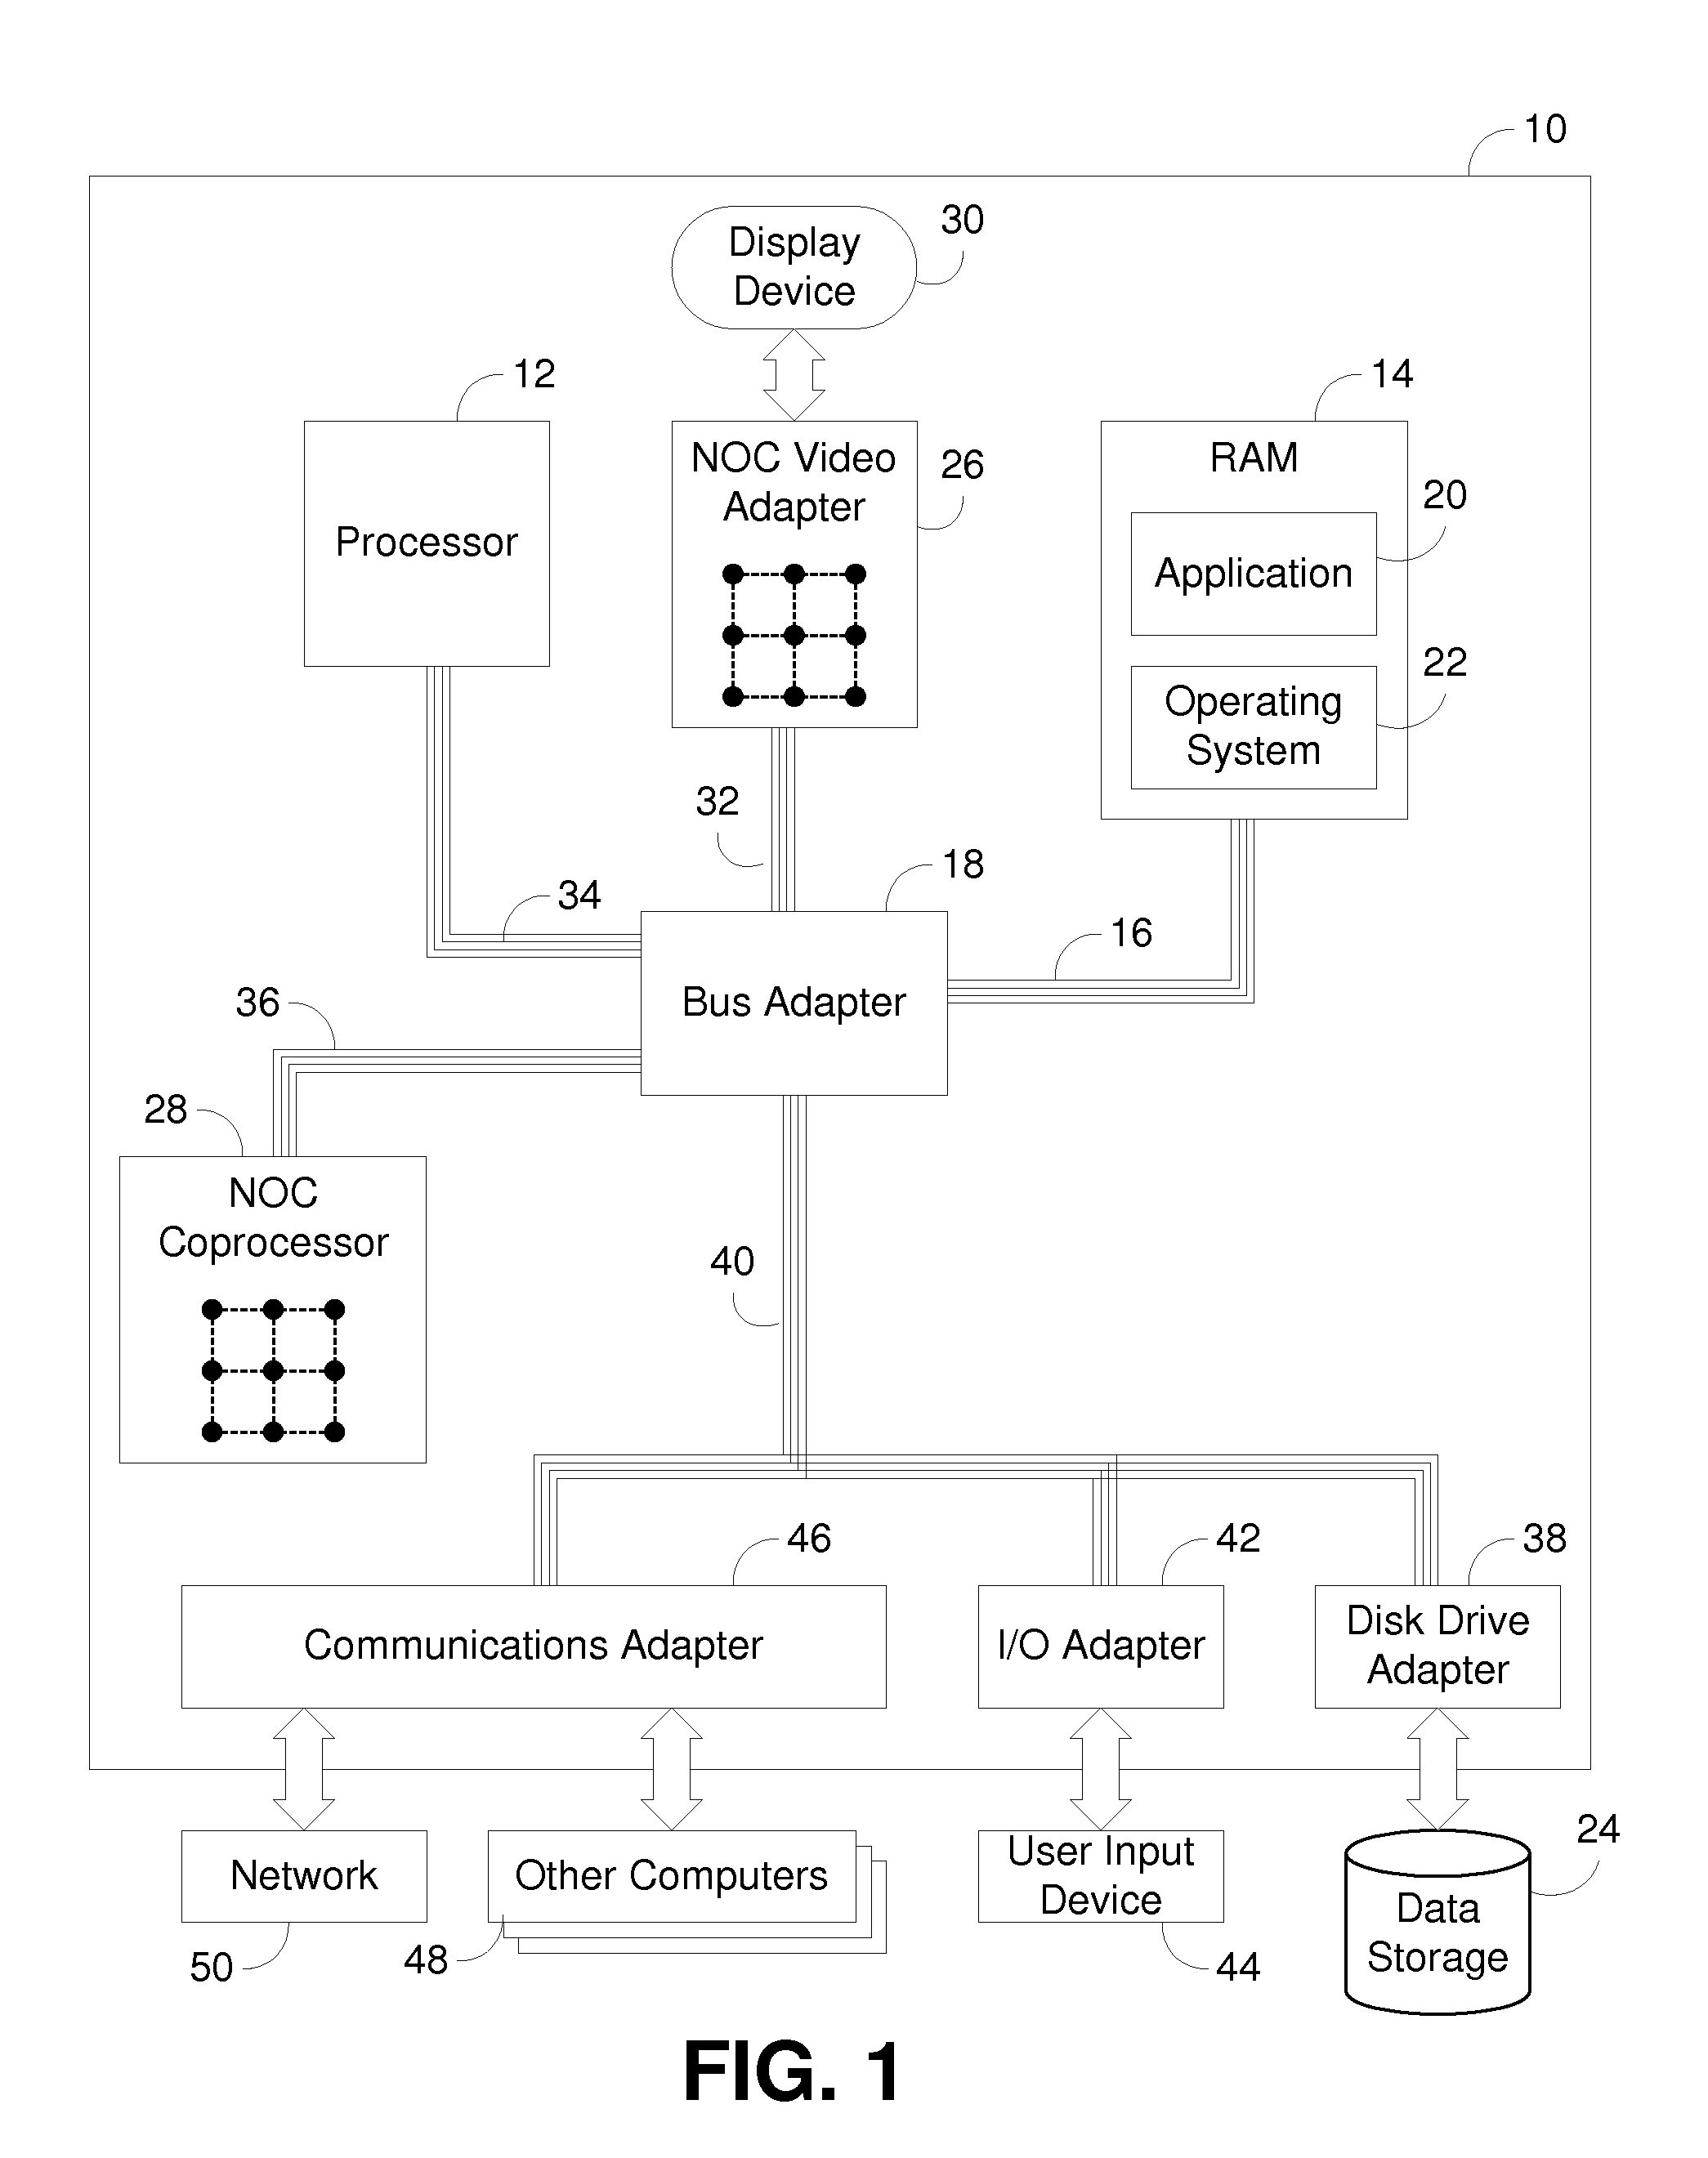 Floating Point Execution Unit for Calculating a One Minus Dot Product Value in a Single Pass